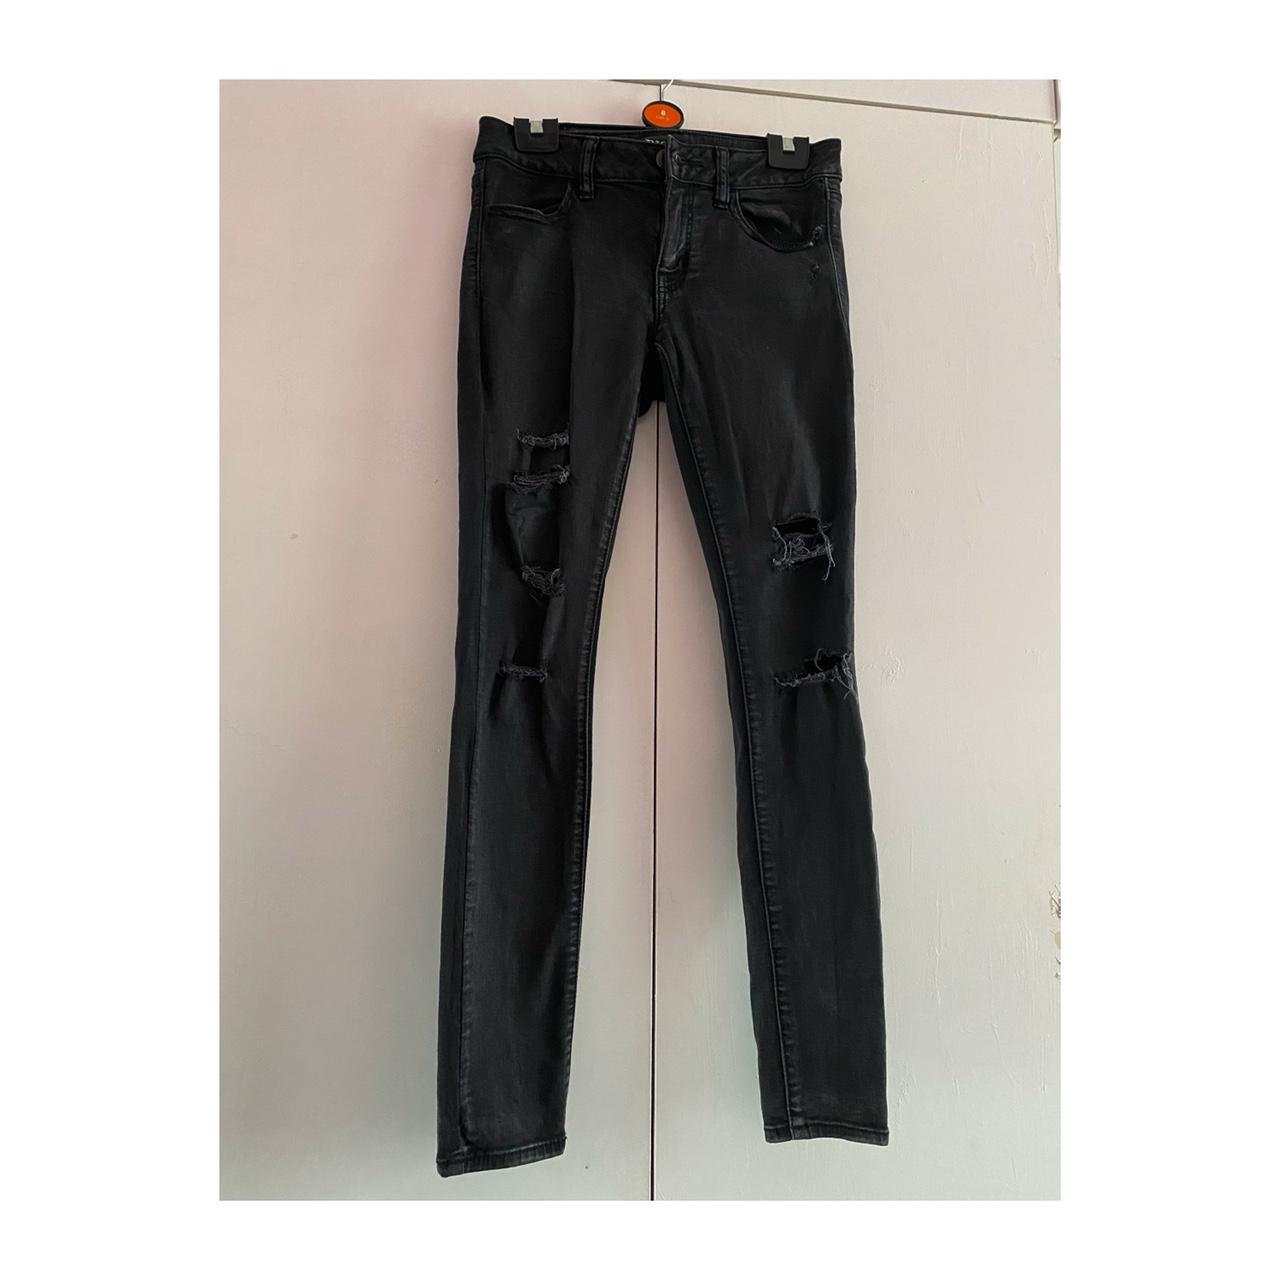 American Eagle Outfitters Women's Black Jeans